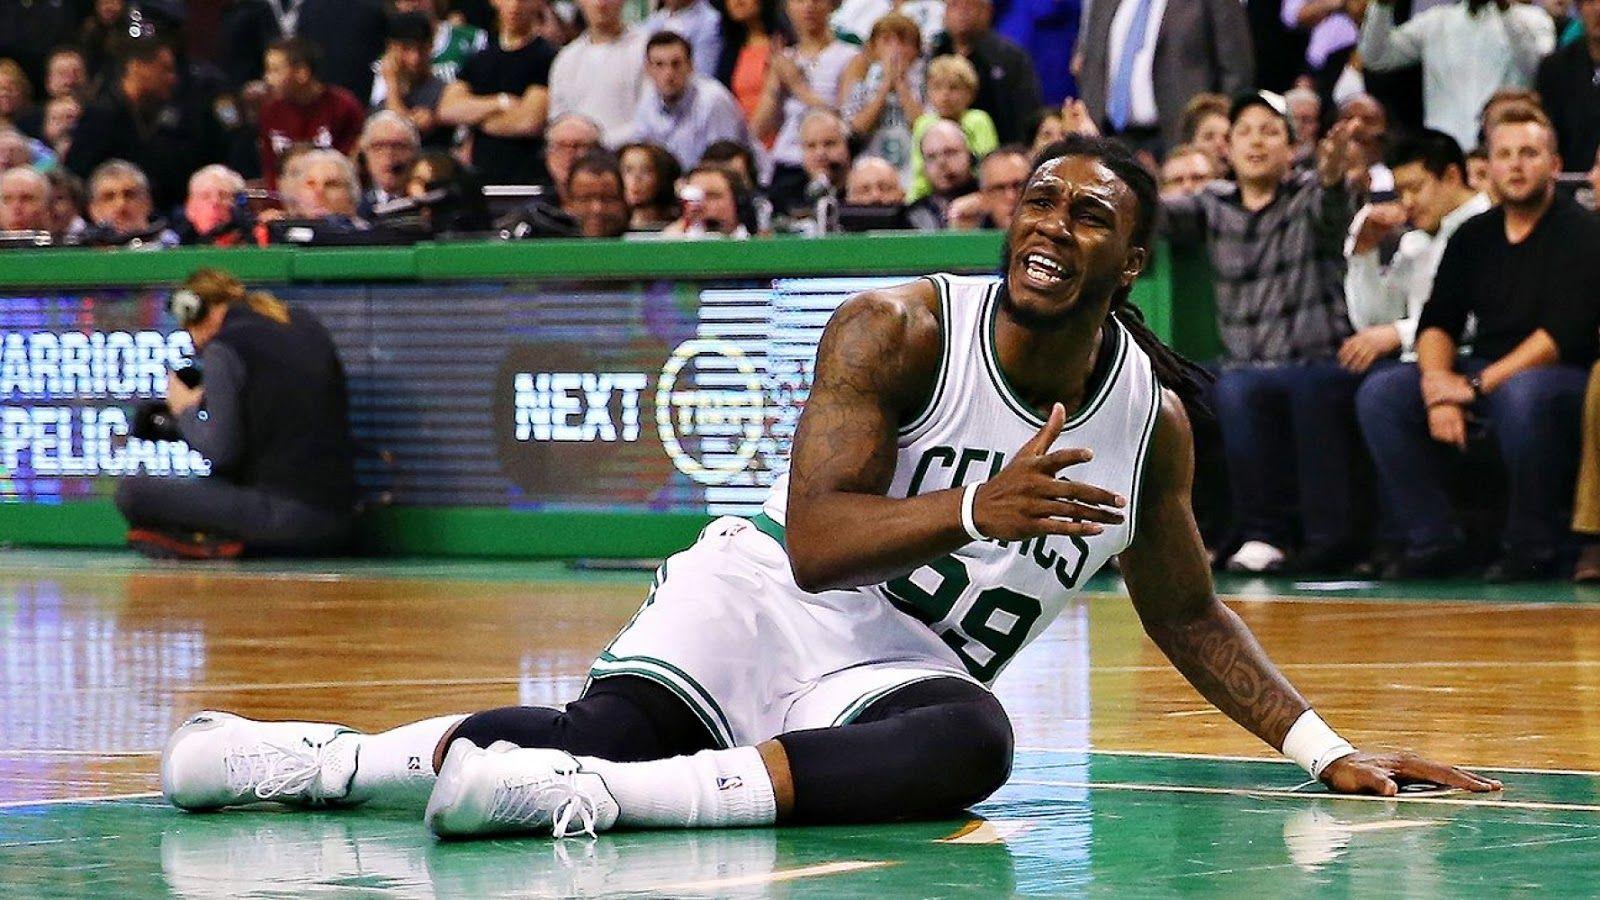 How will J.R. Smith and Jae Crowder fare as teammates